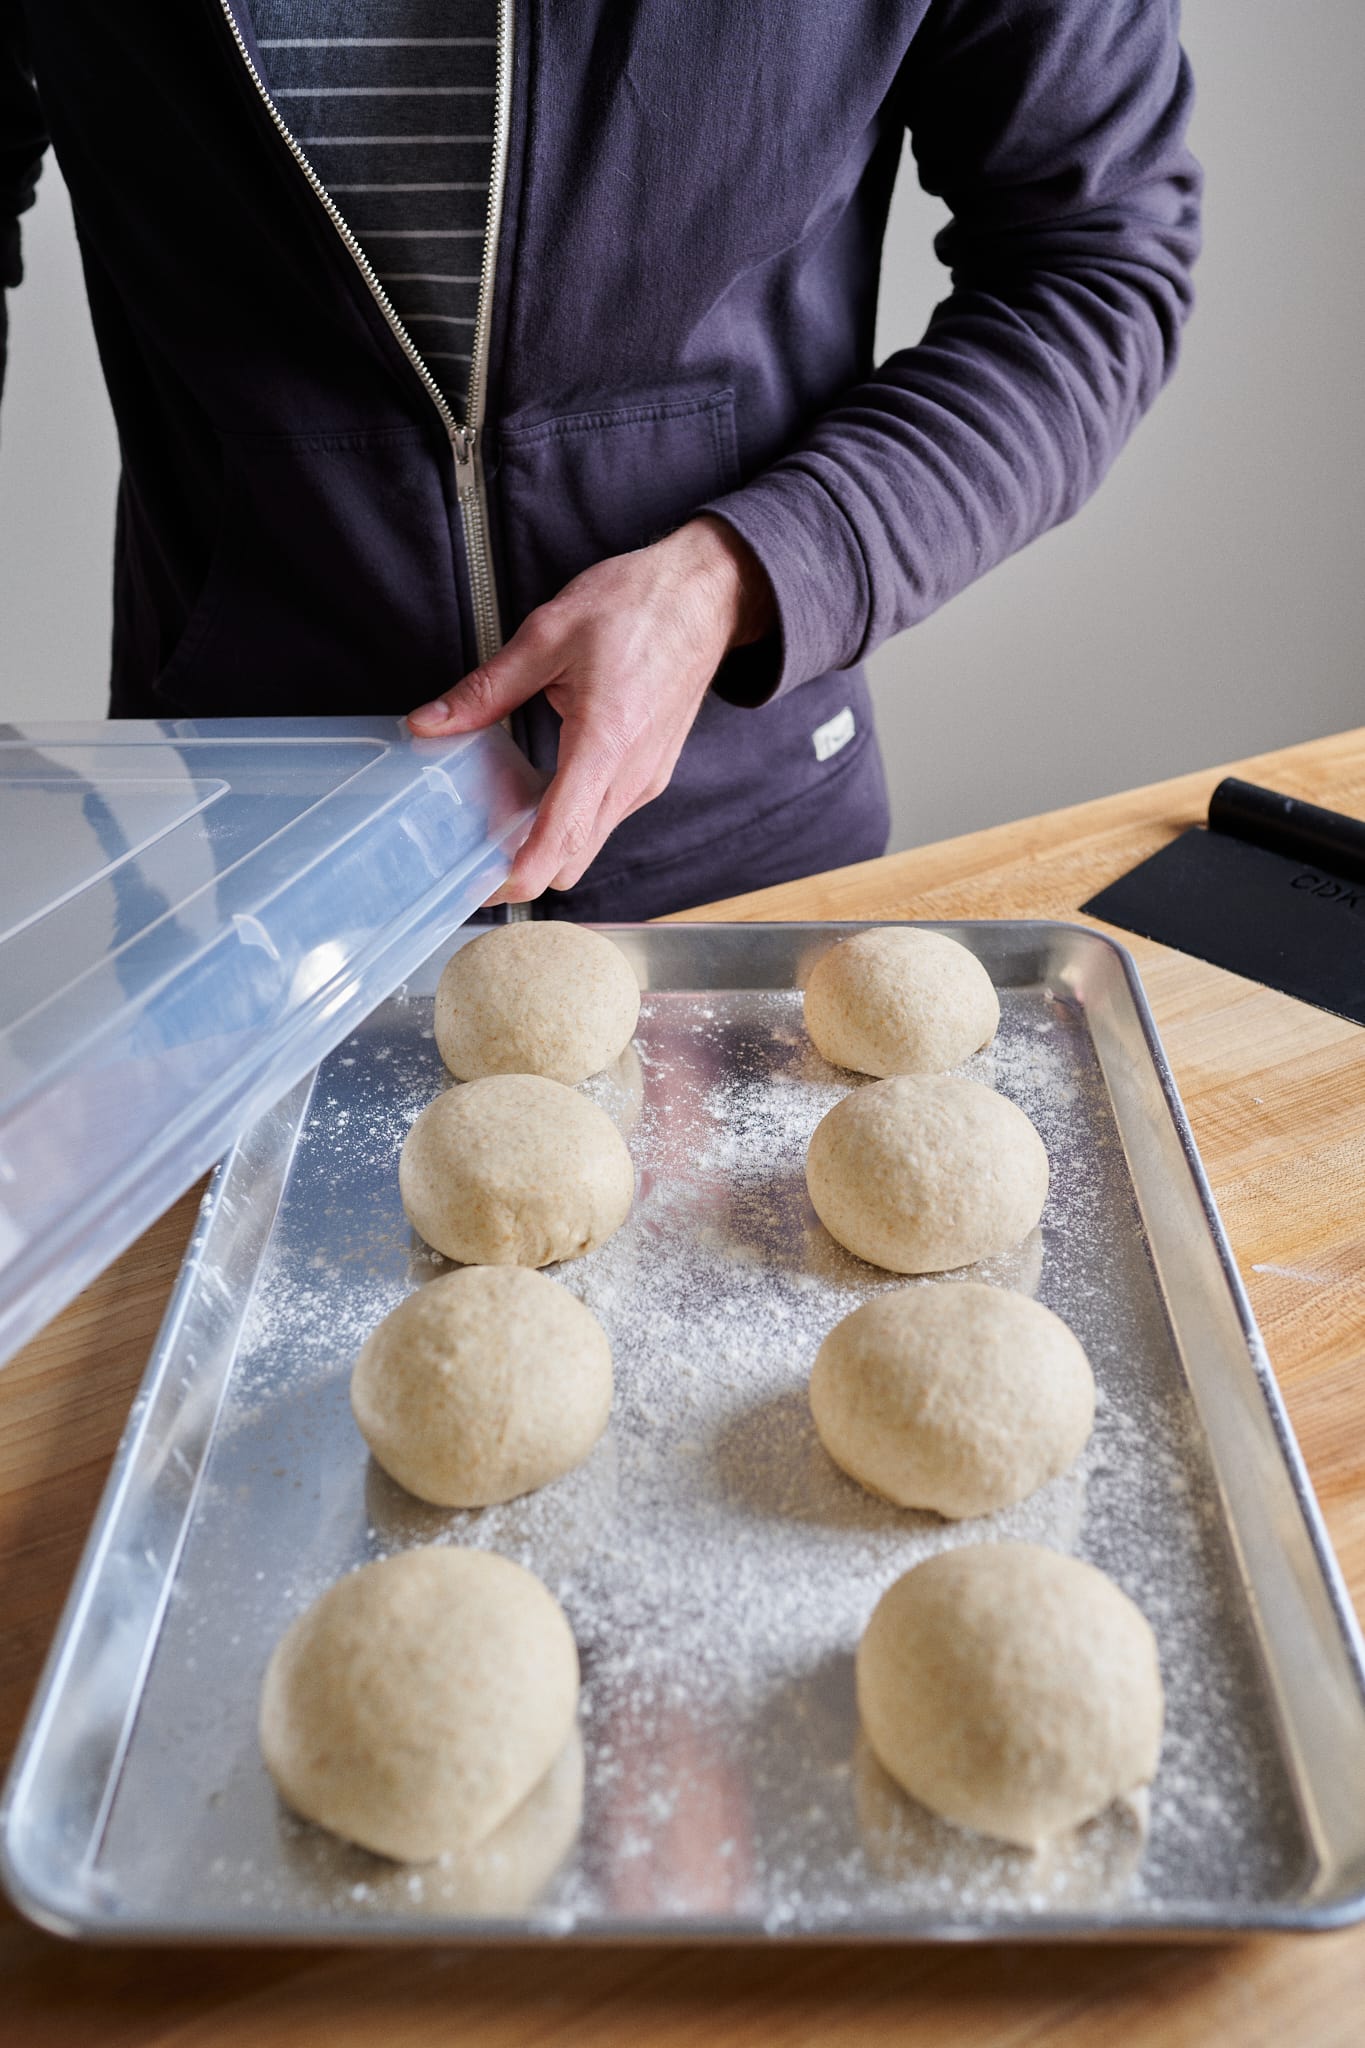 Cover preshaped friselle dough to prevent it from drying.